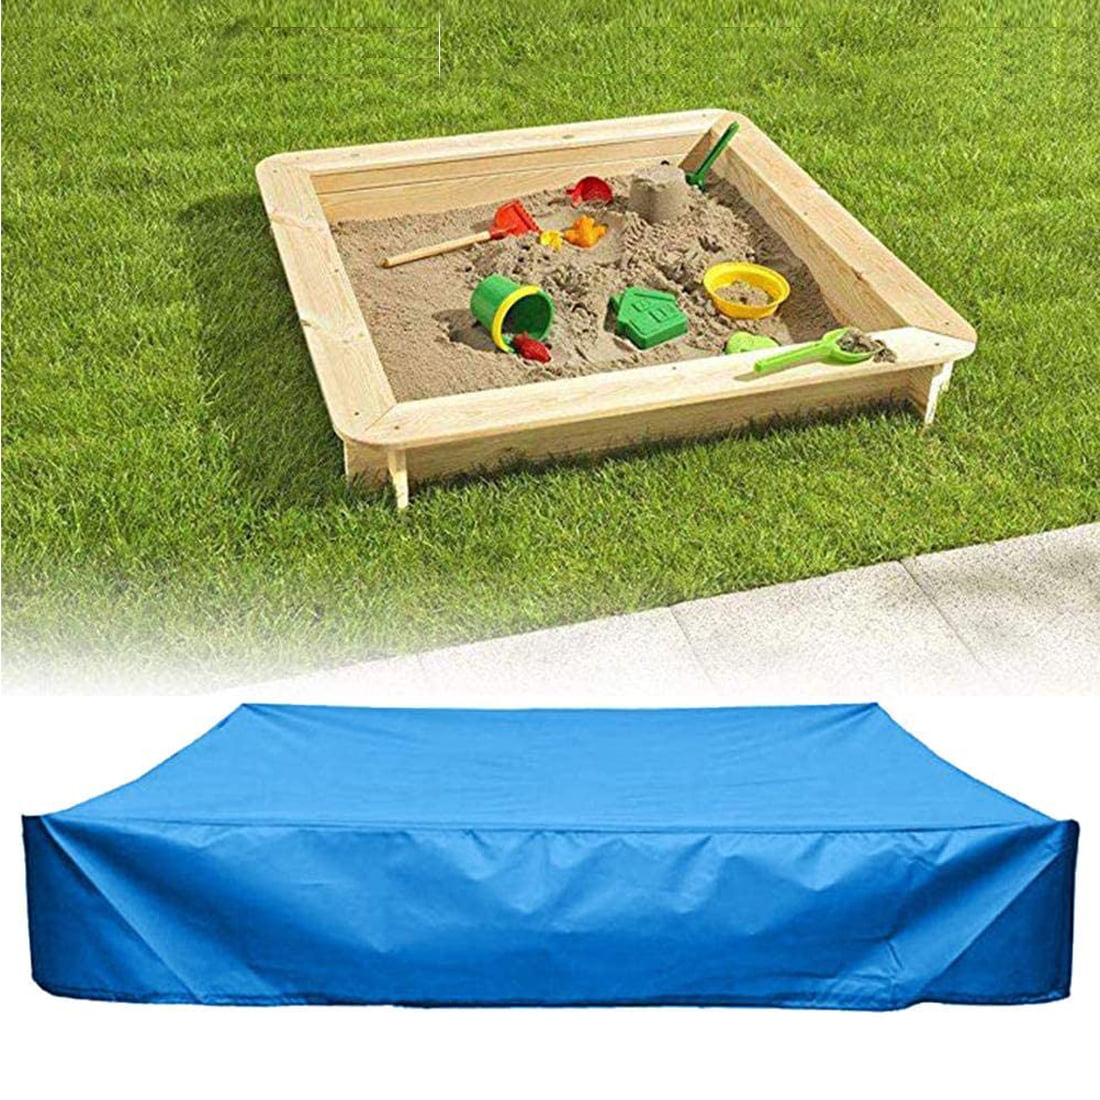 Protection Sandbox Cover Waterproof with Drawstring Sandbox Cover Tool Waterproof Sandpit Pool Cover 